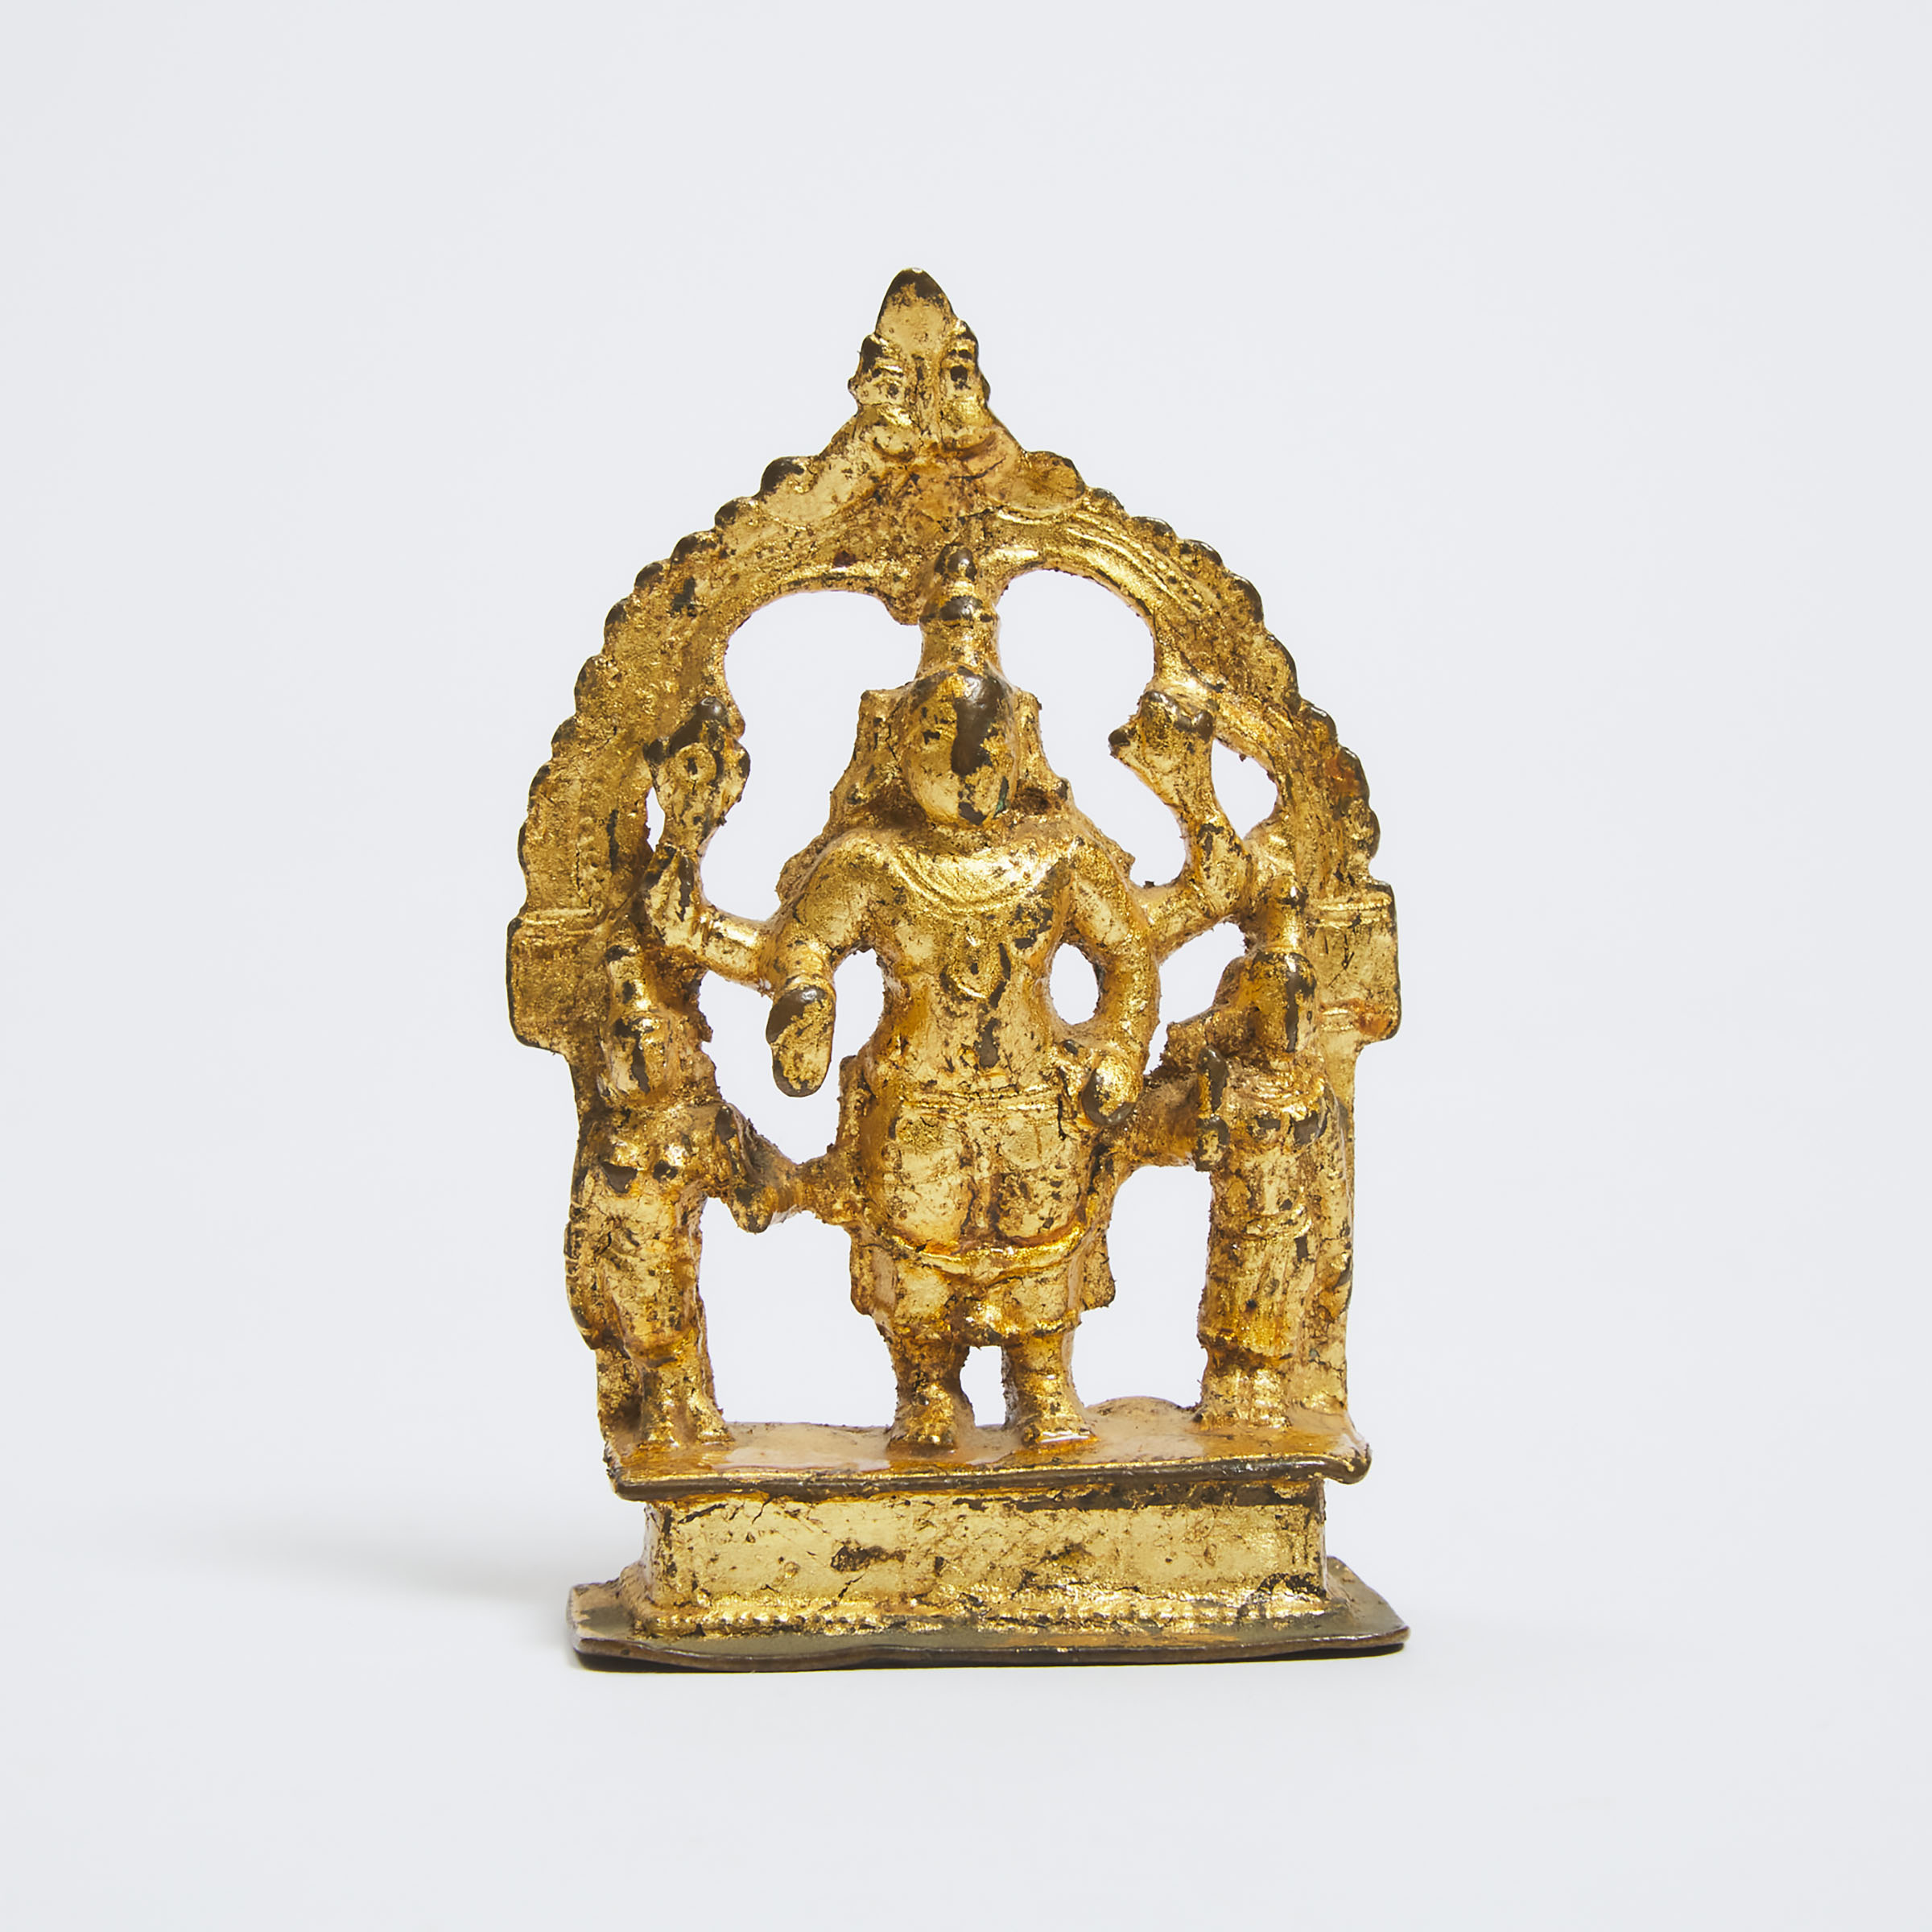 A Small Gilt Bronze Shrine of Vishnu and Consorts, India, 9th Century or Later